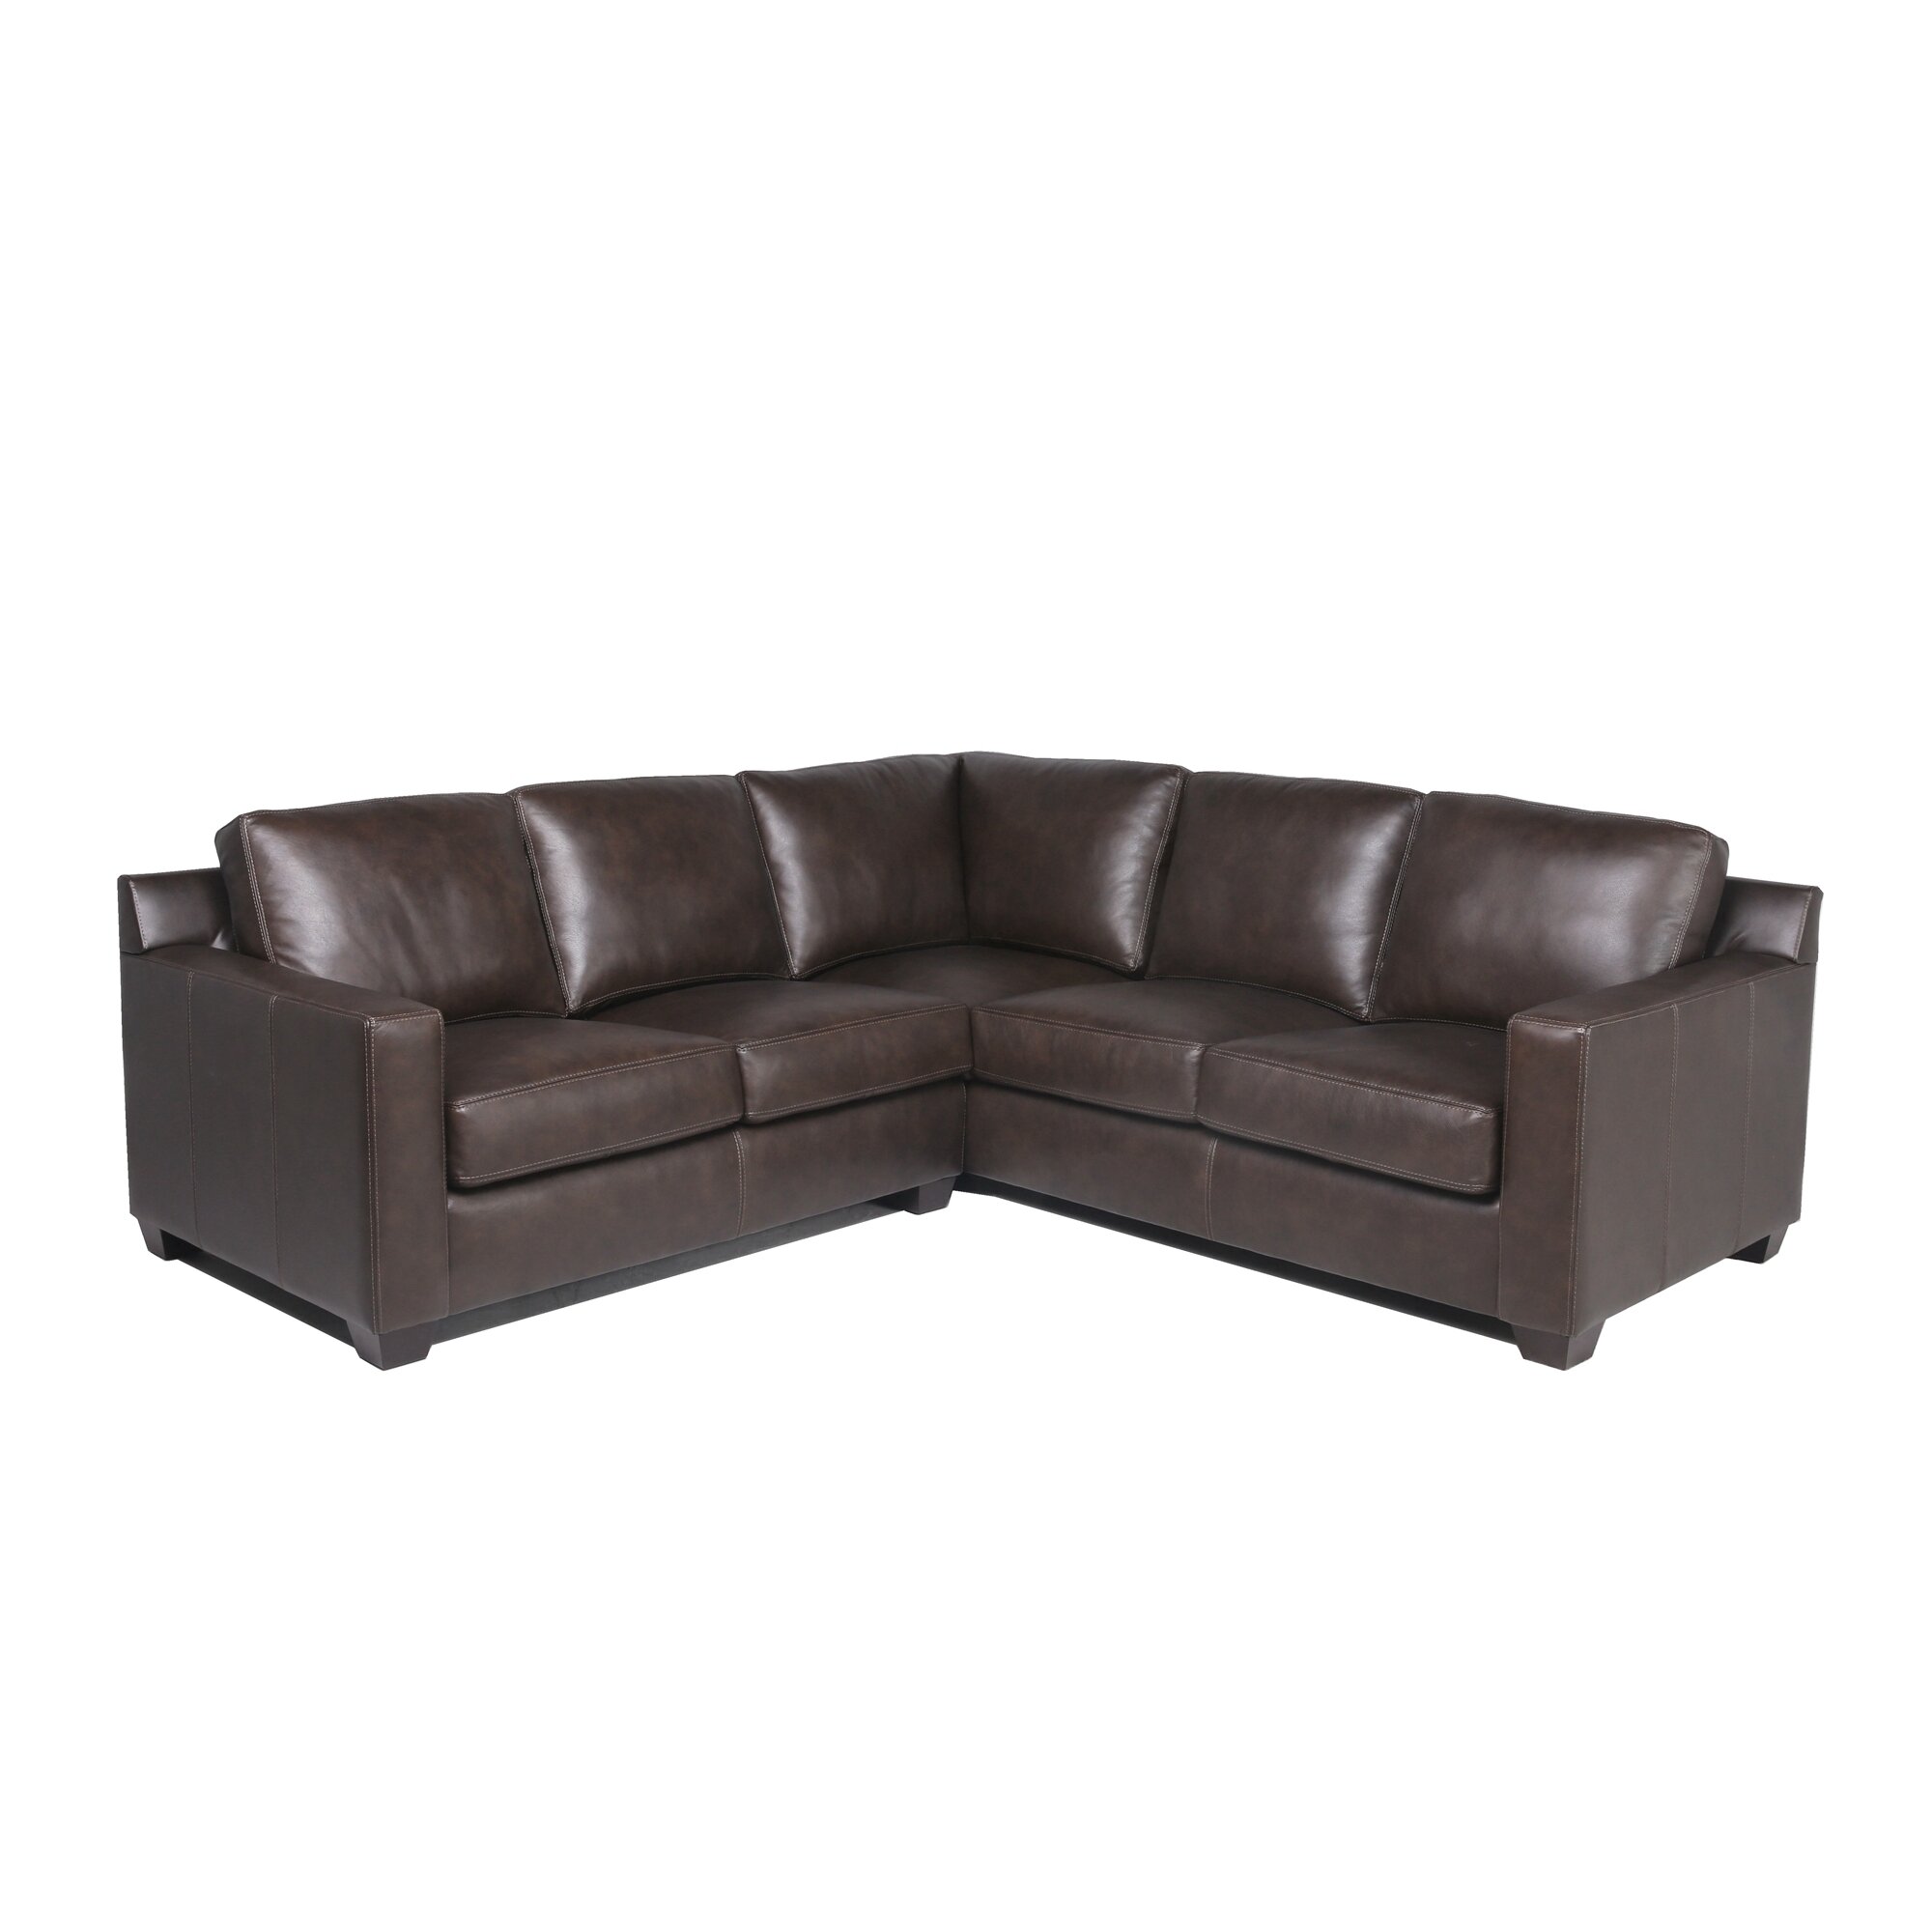 Delores 95″ Wide Symmetrical Corner Sectional